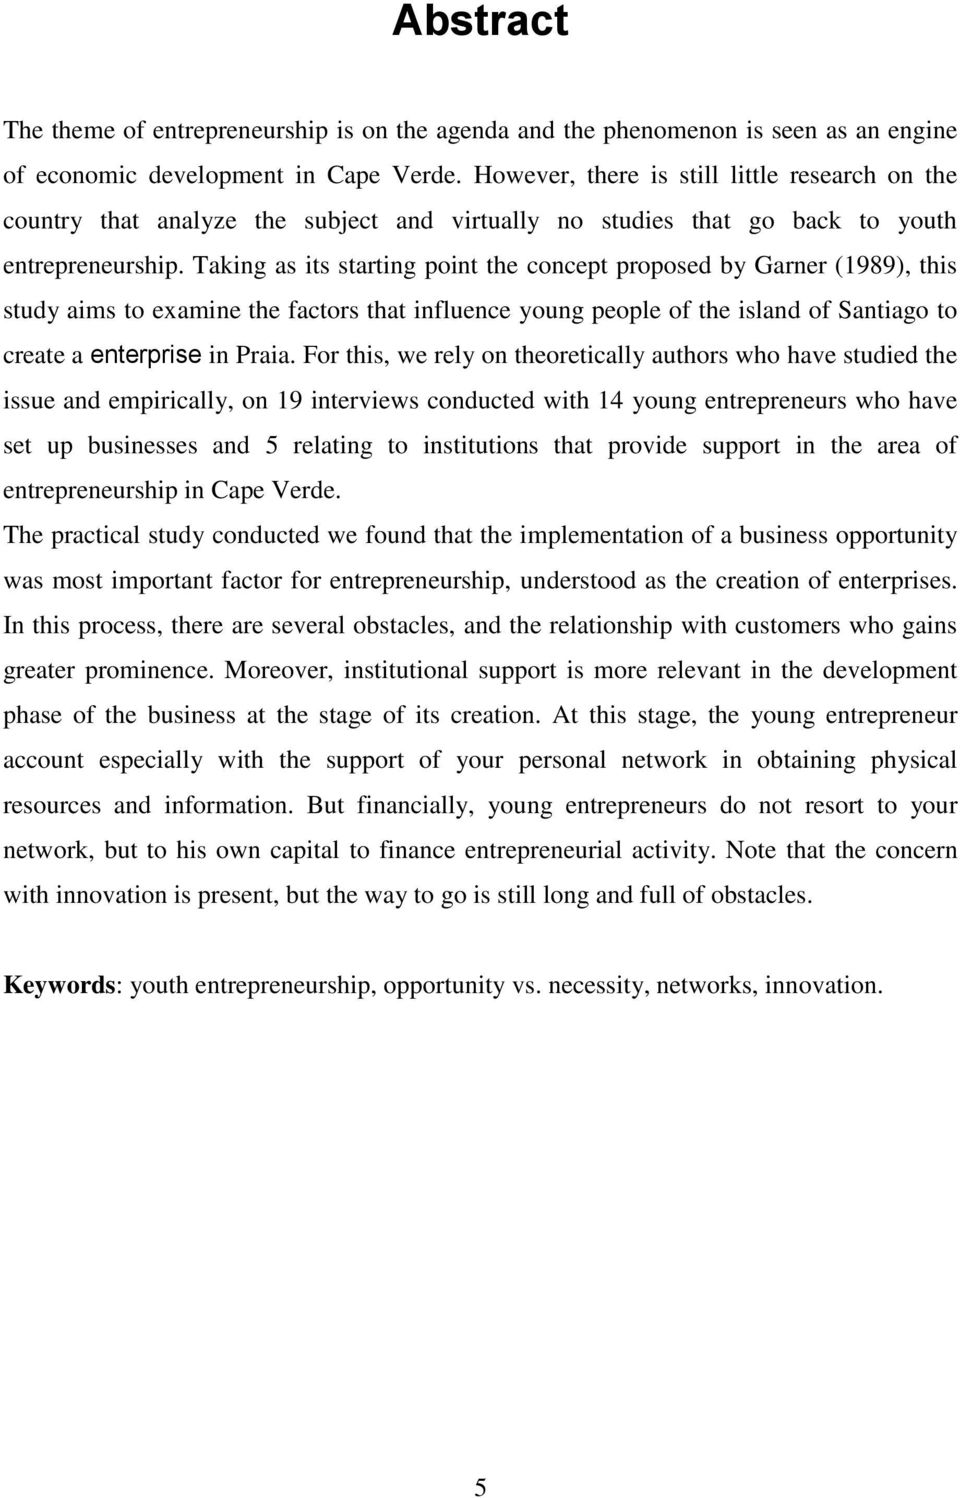 Taking as its starting point the concept proposed by Garner (1989), this study aims to examine the factors that influence young people of the island of Santiago to create a enterprise in Praia.